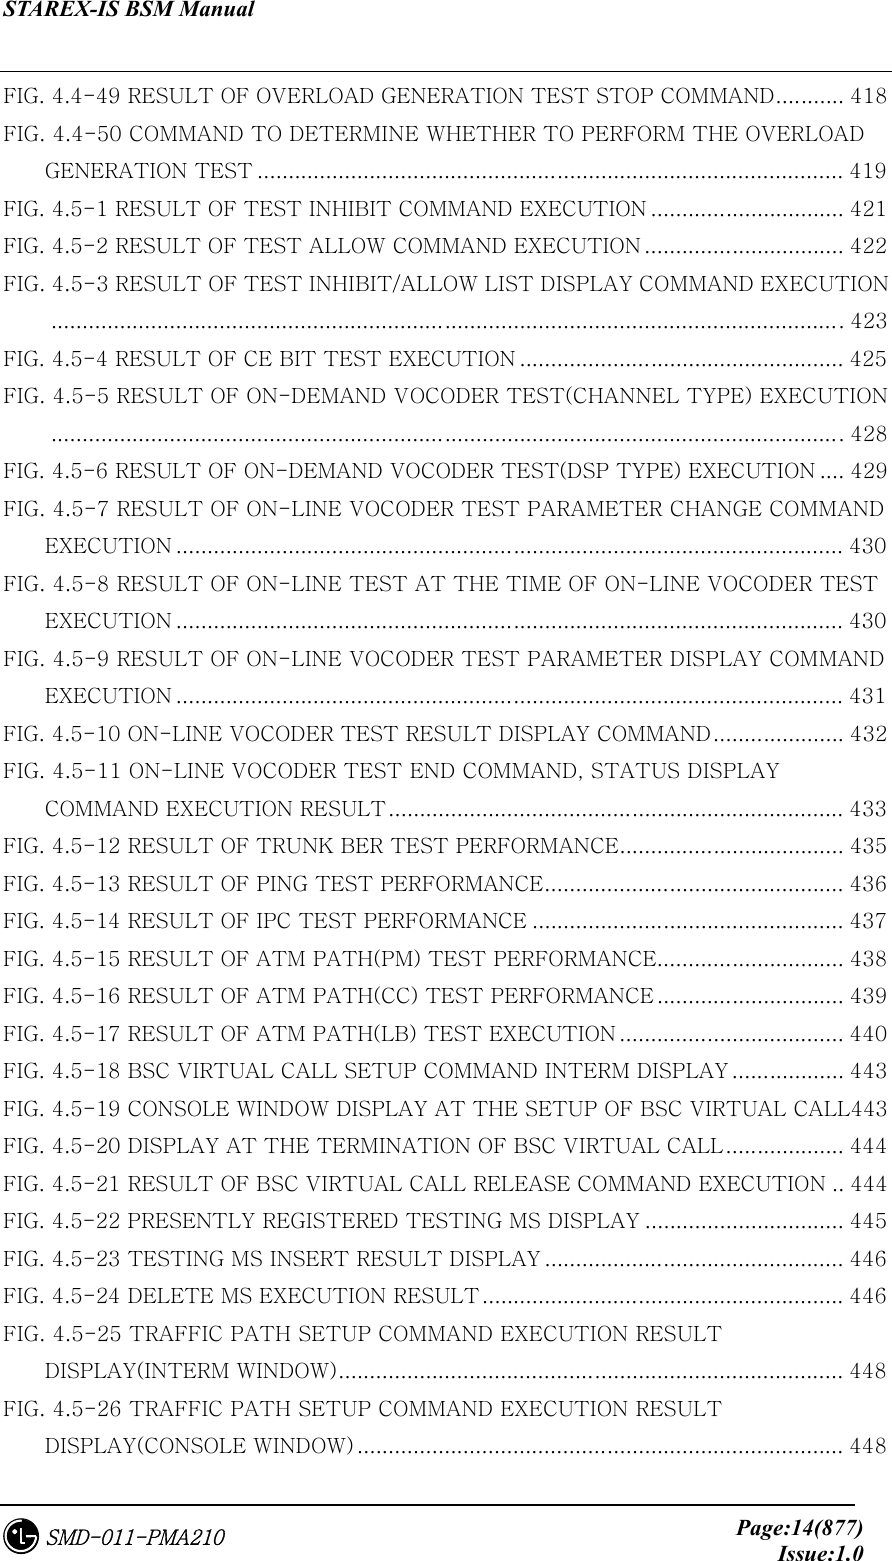 STAREX-IS BSM Manual     Page:14(877)Issue:1.0SMD-011-PMA210 FIG. 4.4-49 RESULT OF OVERLOAD GENERATION TEST STOP COMMAND........... 418 FIG. 4.4-50 COMMAND TO DETERMINE WHETHER TO PERFORM THE OVERLOAD GENERATION TEST .............................................................................................. 419 FIG. 4.5-1 RESULT OF TEST INHIBIT COMMAND EXECUTION ............................... 421 FIG. 4.5-2 RESULT OF TEST ALLOW COMMAND EXECUTION ................................ 422 FIG. 4.5-3 RESULT OF TEST INHIBIT/ALLOW LIST DISPLAY COMMAND EXECUTION............................................................................................................................... 423 FIG. 4.5-4 RESULT OF CE BIT TEST EXECUTION .................................................... 425 FIG. 4.5-5 RESULT OF ON-DEMAND VOCODER TEST(CHANNEL TYPE) EXECUTION............................................................................................................................... 428 FIG. 4.5-6 RESULT OF ON-DEMAND VOCODER TEST(DSP TYPE) EXECUTION .... 429 FIG. 4.5-7 RESULT OF ON-LINE VOCODER TEST PARAMETER CHANGE COMMAND EXECUTION ........................................................................................................... 430 FIG. 4.5-8 RESULT OF ON-LINE TEST AT THE TIME OF ON-LINE VOCODER TEST EXECUTION ........................................................................................................... 430 FIG. 4.5-9 RESULT OF ON-LINE VOCODER TEST PARAMETER DISPLAY COMMAND EXECUTION ........................................................................................................... 431 FIG. 4.5-10 ON-LINE VOCODER TEST RESULT DISPLAY COMMAND..................... 432 FIG. 4.5-11 ON-LINE VOCODER TEST END COMMAND, STATUS DISPLAY COMMAND EXECUTION RESULT......................................................................... 433 FIG. 4.5-12 RESULT OF TRUNK BER TEST PERFORMANCE.................................... 435 FIG. 4.5-13 RESULT OF PING TEST PERFORMANCE................................................ 436 FIG. 4.5-14 RESULT OF IPC TEST PERFORMANCE .................................................. 437 FIG. 4.5-15 RESULT OF ATM PATH(PM) TEST PERFORMANCE.............................. 438 FIG. 4.5-16 RESULT OF ATM PATH(CC) TEST PERFORMANCE .............................. 439 FIG. 4.5-17 RESULT OF ATM PATH(LB) TEST EXECUTION .................................... 440 FIG. 4.5-18 BSC VIRTUAL CALL SETUP COMMAND INTERM DISPLAY .................. 443 FIG. 4.5-19 CONSOLE WINDOW DISPLAY AT THE SETUP OF BSC VIRTUAL CALL443 FIG. 4.5-20 DISPLAY AT THE TERMINATION OF BSC VIRTUAL CALL................... 444 FIG. 4.5-21 RESULT OF BSC VIRTUAL CALL RELEASE COMMAND EXECUTION .. 444 FIG. 4.5-22 PRESENTLY REGISTERED TESTING MS DISPLAY ................................ 445 FIG. 4.5-23 TESTING MS INSERT RESULT DISPLAY ................................................ 446 FIG. 4.5-24 DELETE MS EXECUTION RESULT.......................................................... 446 FIG. 4.5-25 TRAFFIC PATH SETUP COMMAND EXECUTION RESULT DISPLAY(INTERM WINDOW)................................................................................. 448 FIG. 4.5-26 TRAFFIC PATH SETUP COMMAND EXECUTION RESULT DISPLAY(CONSOLE WINDOW) .............................................................................. 448 